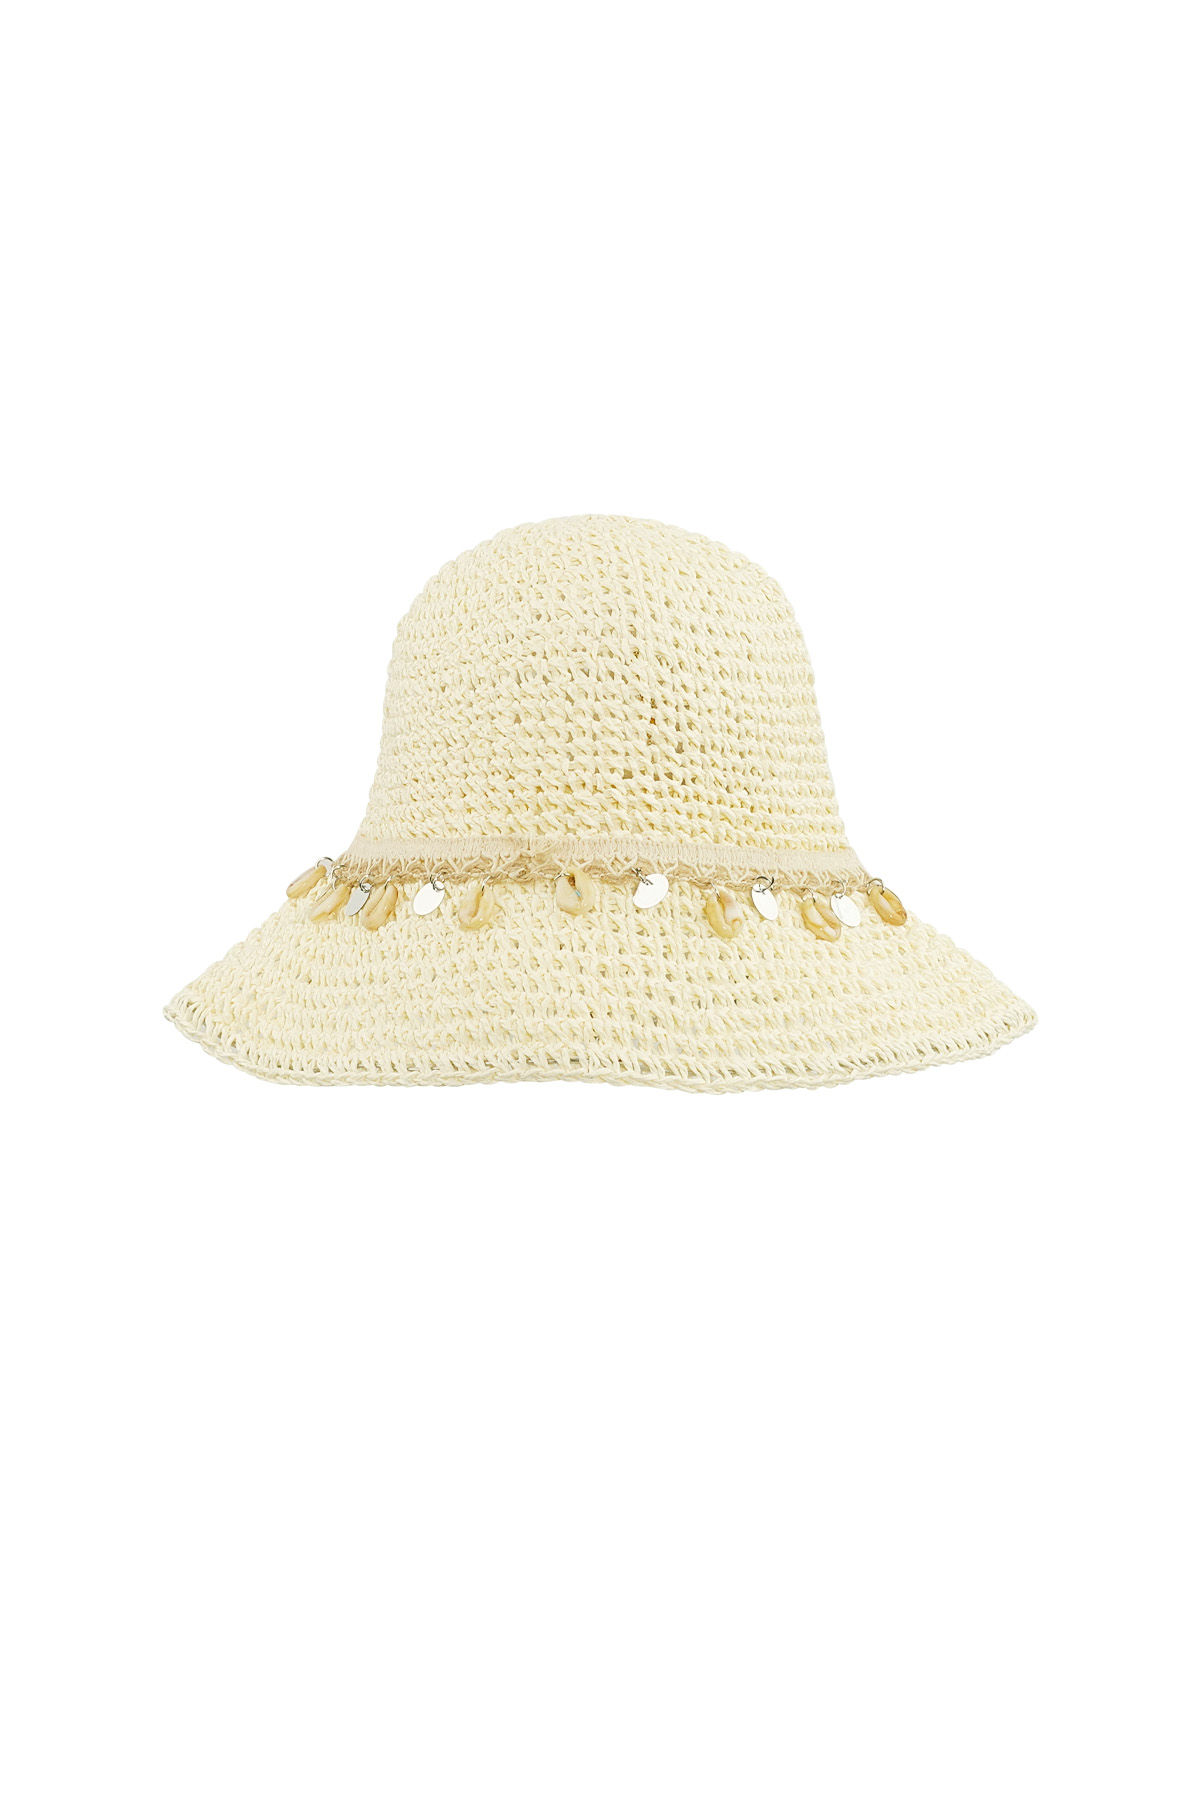 Beach hat with shells - off-white h5 